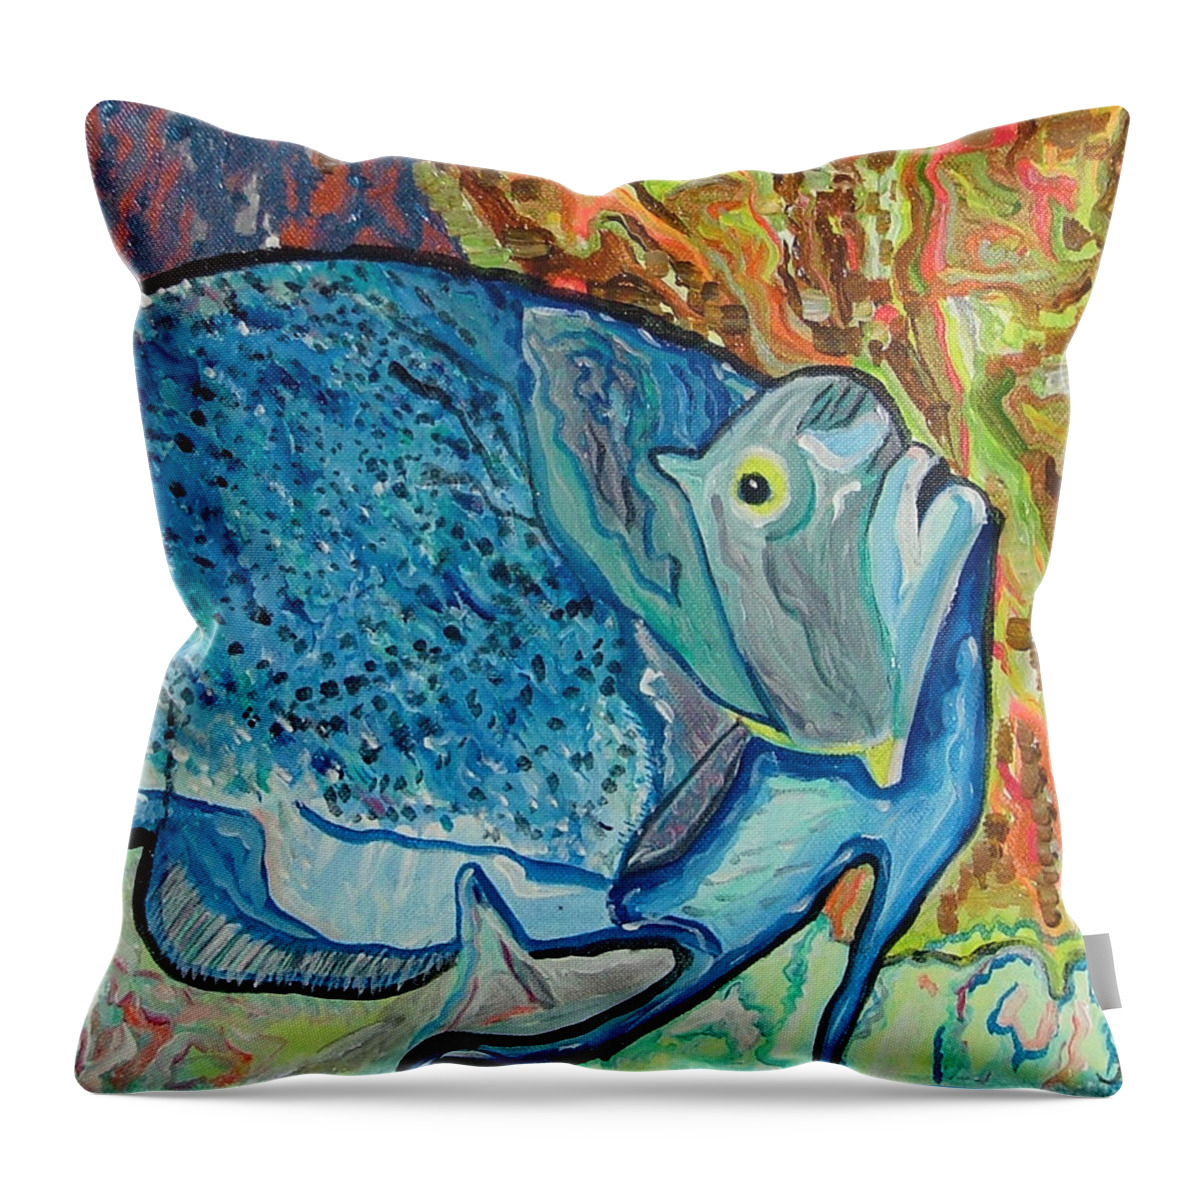 French Throw Pillow featuring the painting French Angle Fish by Heather Lennox